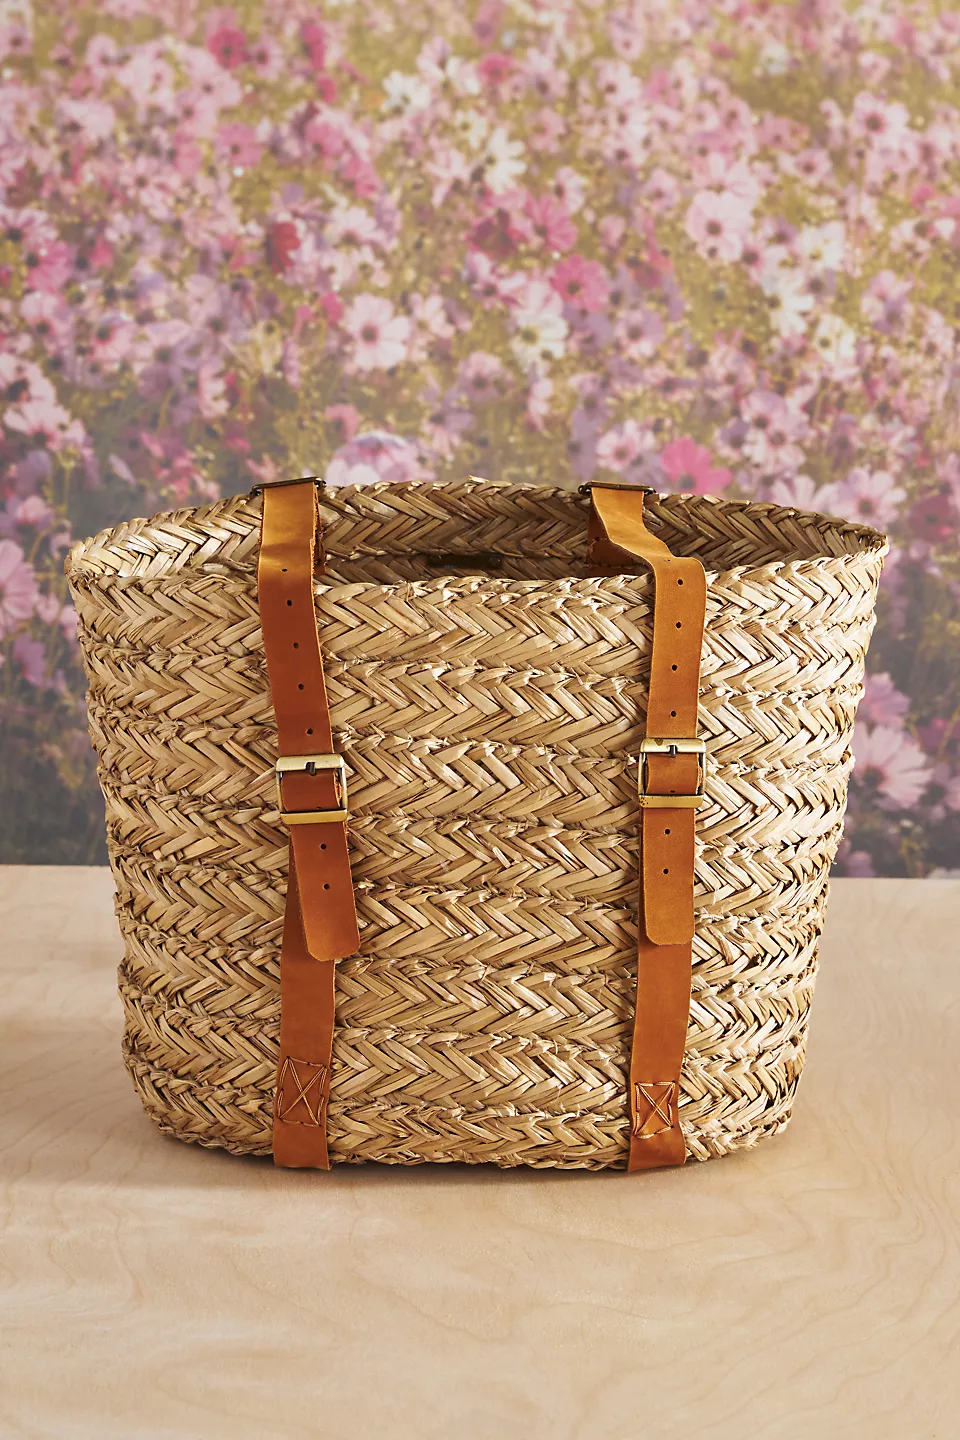 Shop Olli Ella Soukie Backpack from Anthropologie on Openhaus